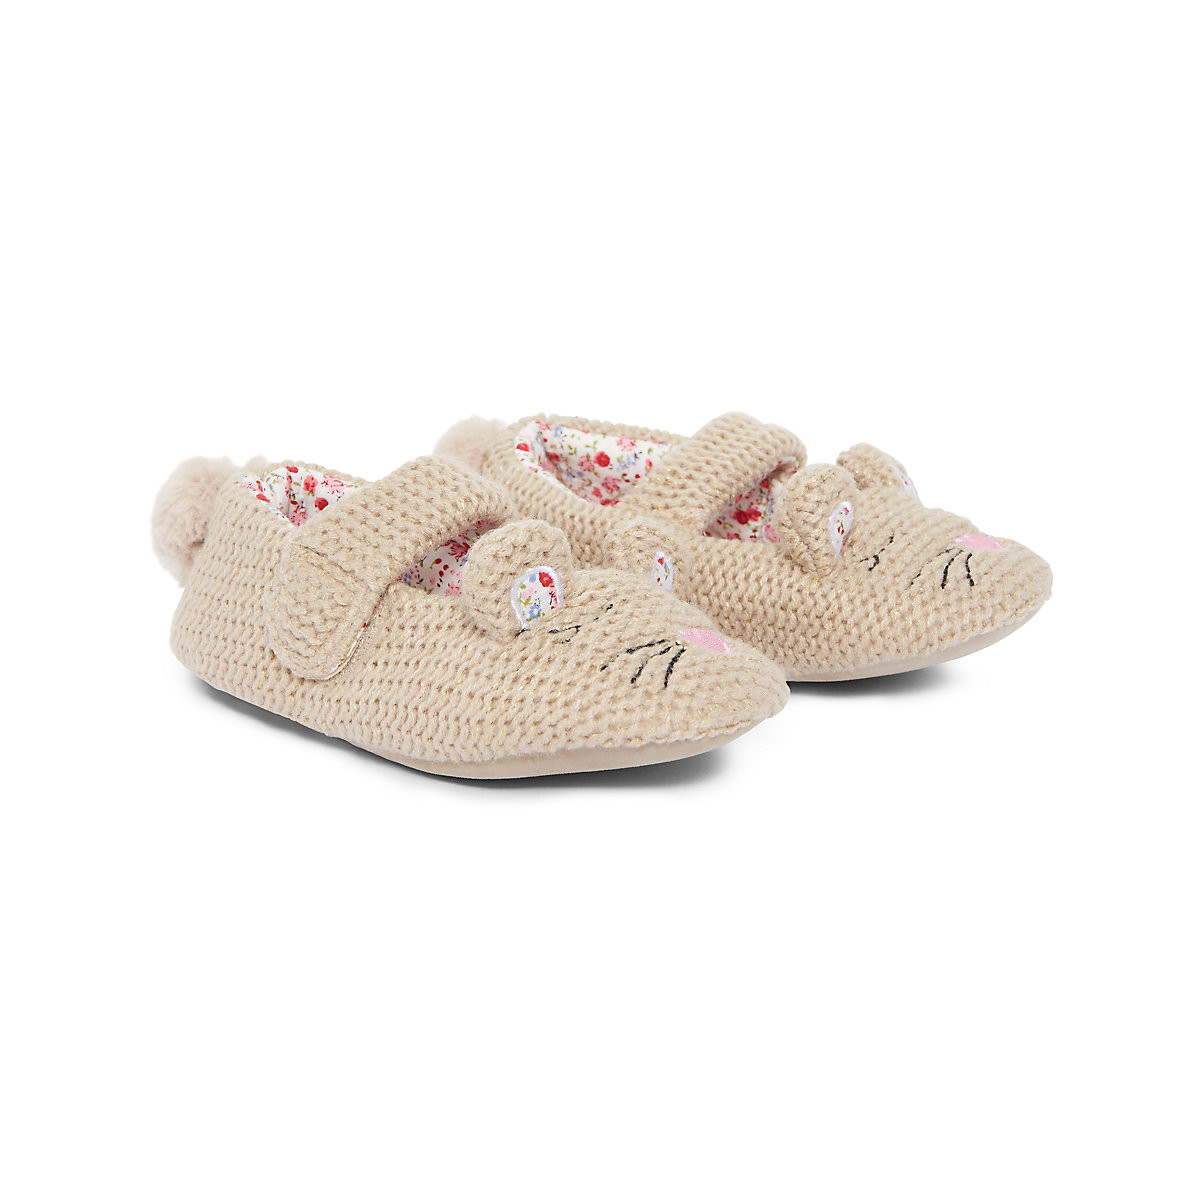 mothercare baby slippers \u003e Up to 65 